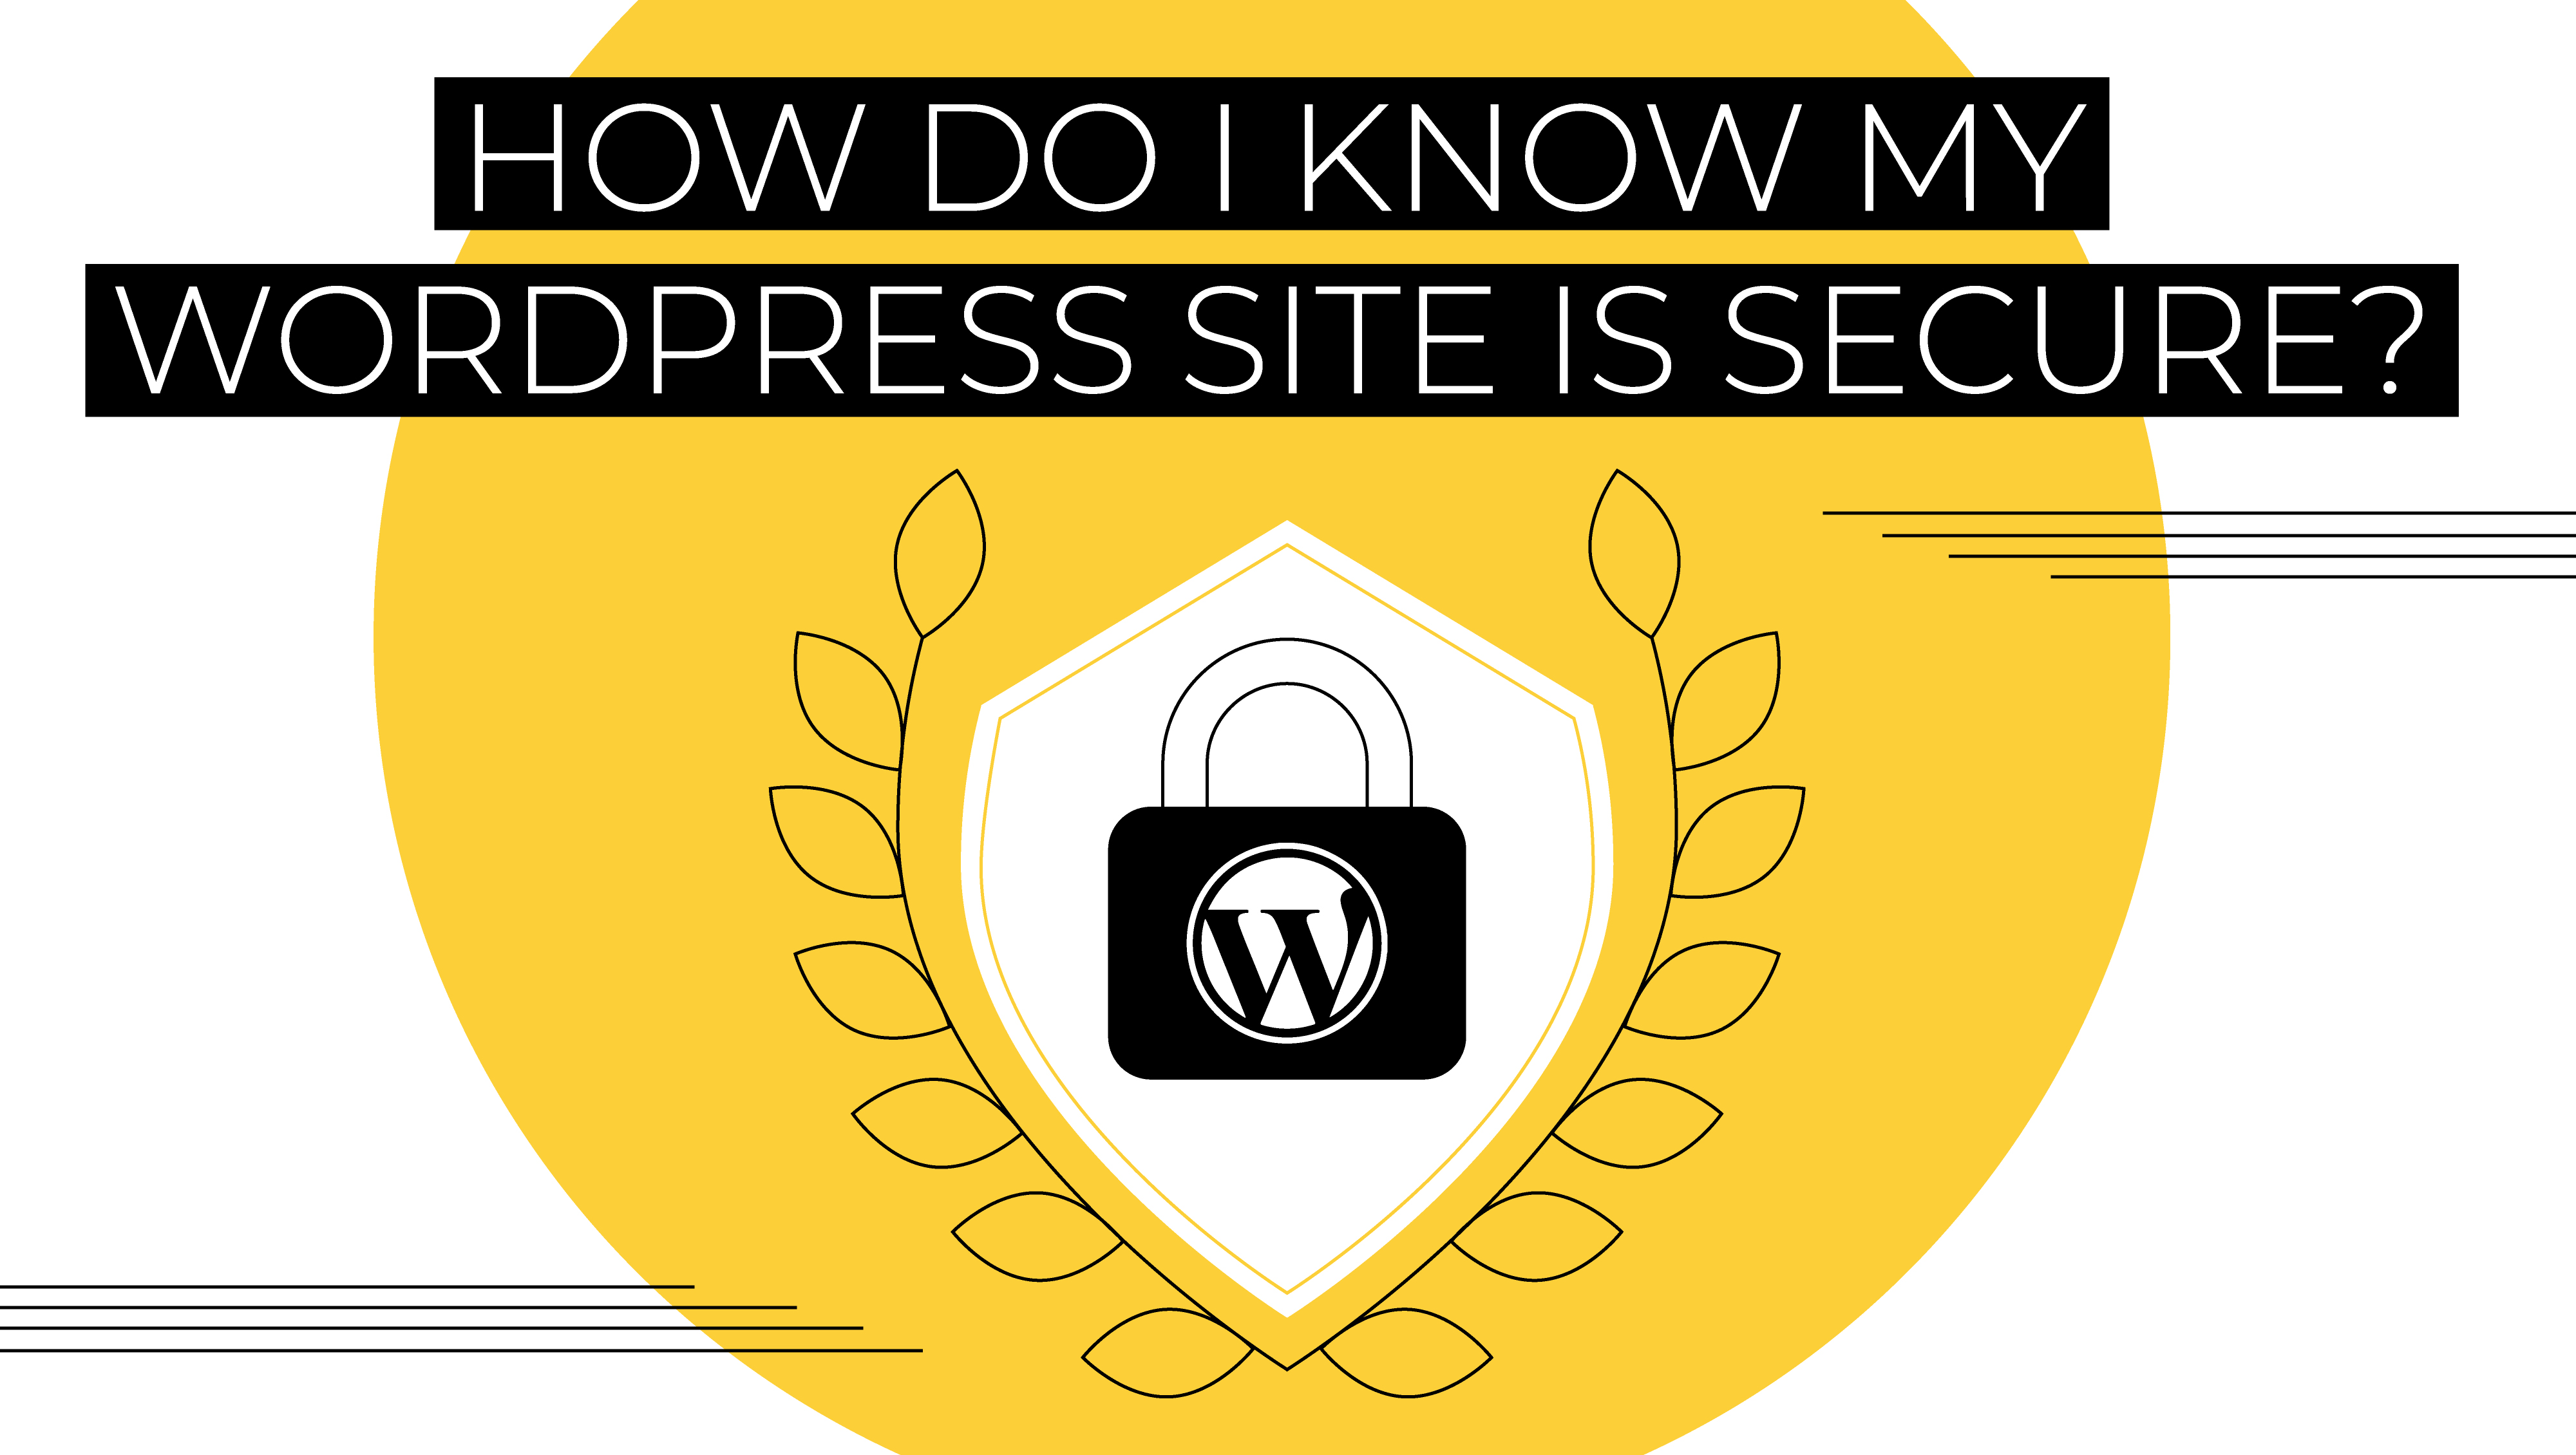 How Do I Know My WordPress Site Is Secure?